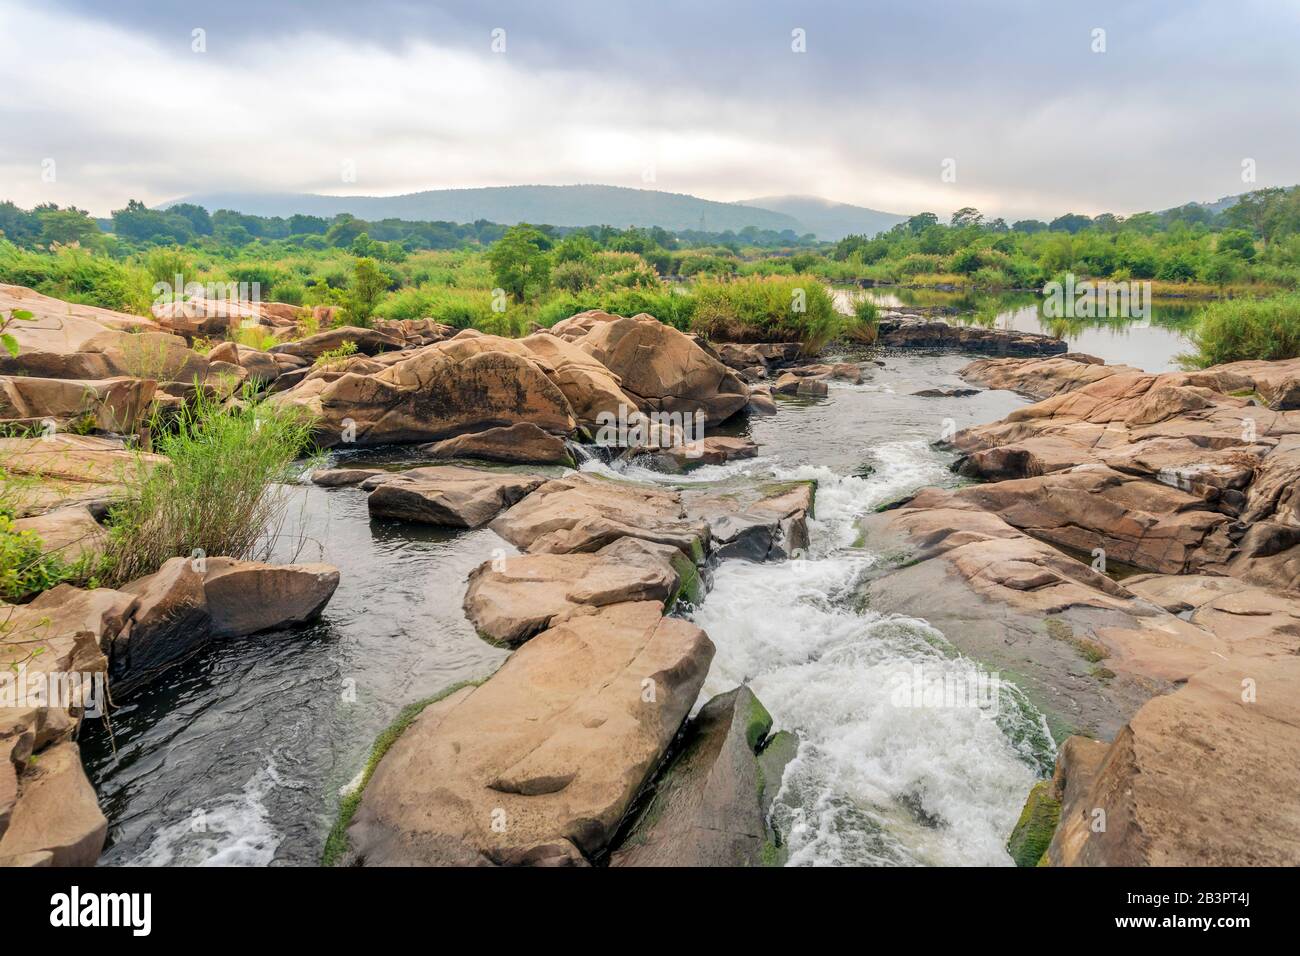 Stream with rocks near Crocodile Bridge in Kruger National Park, South Africa Stock Photo